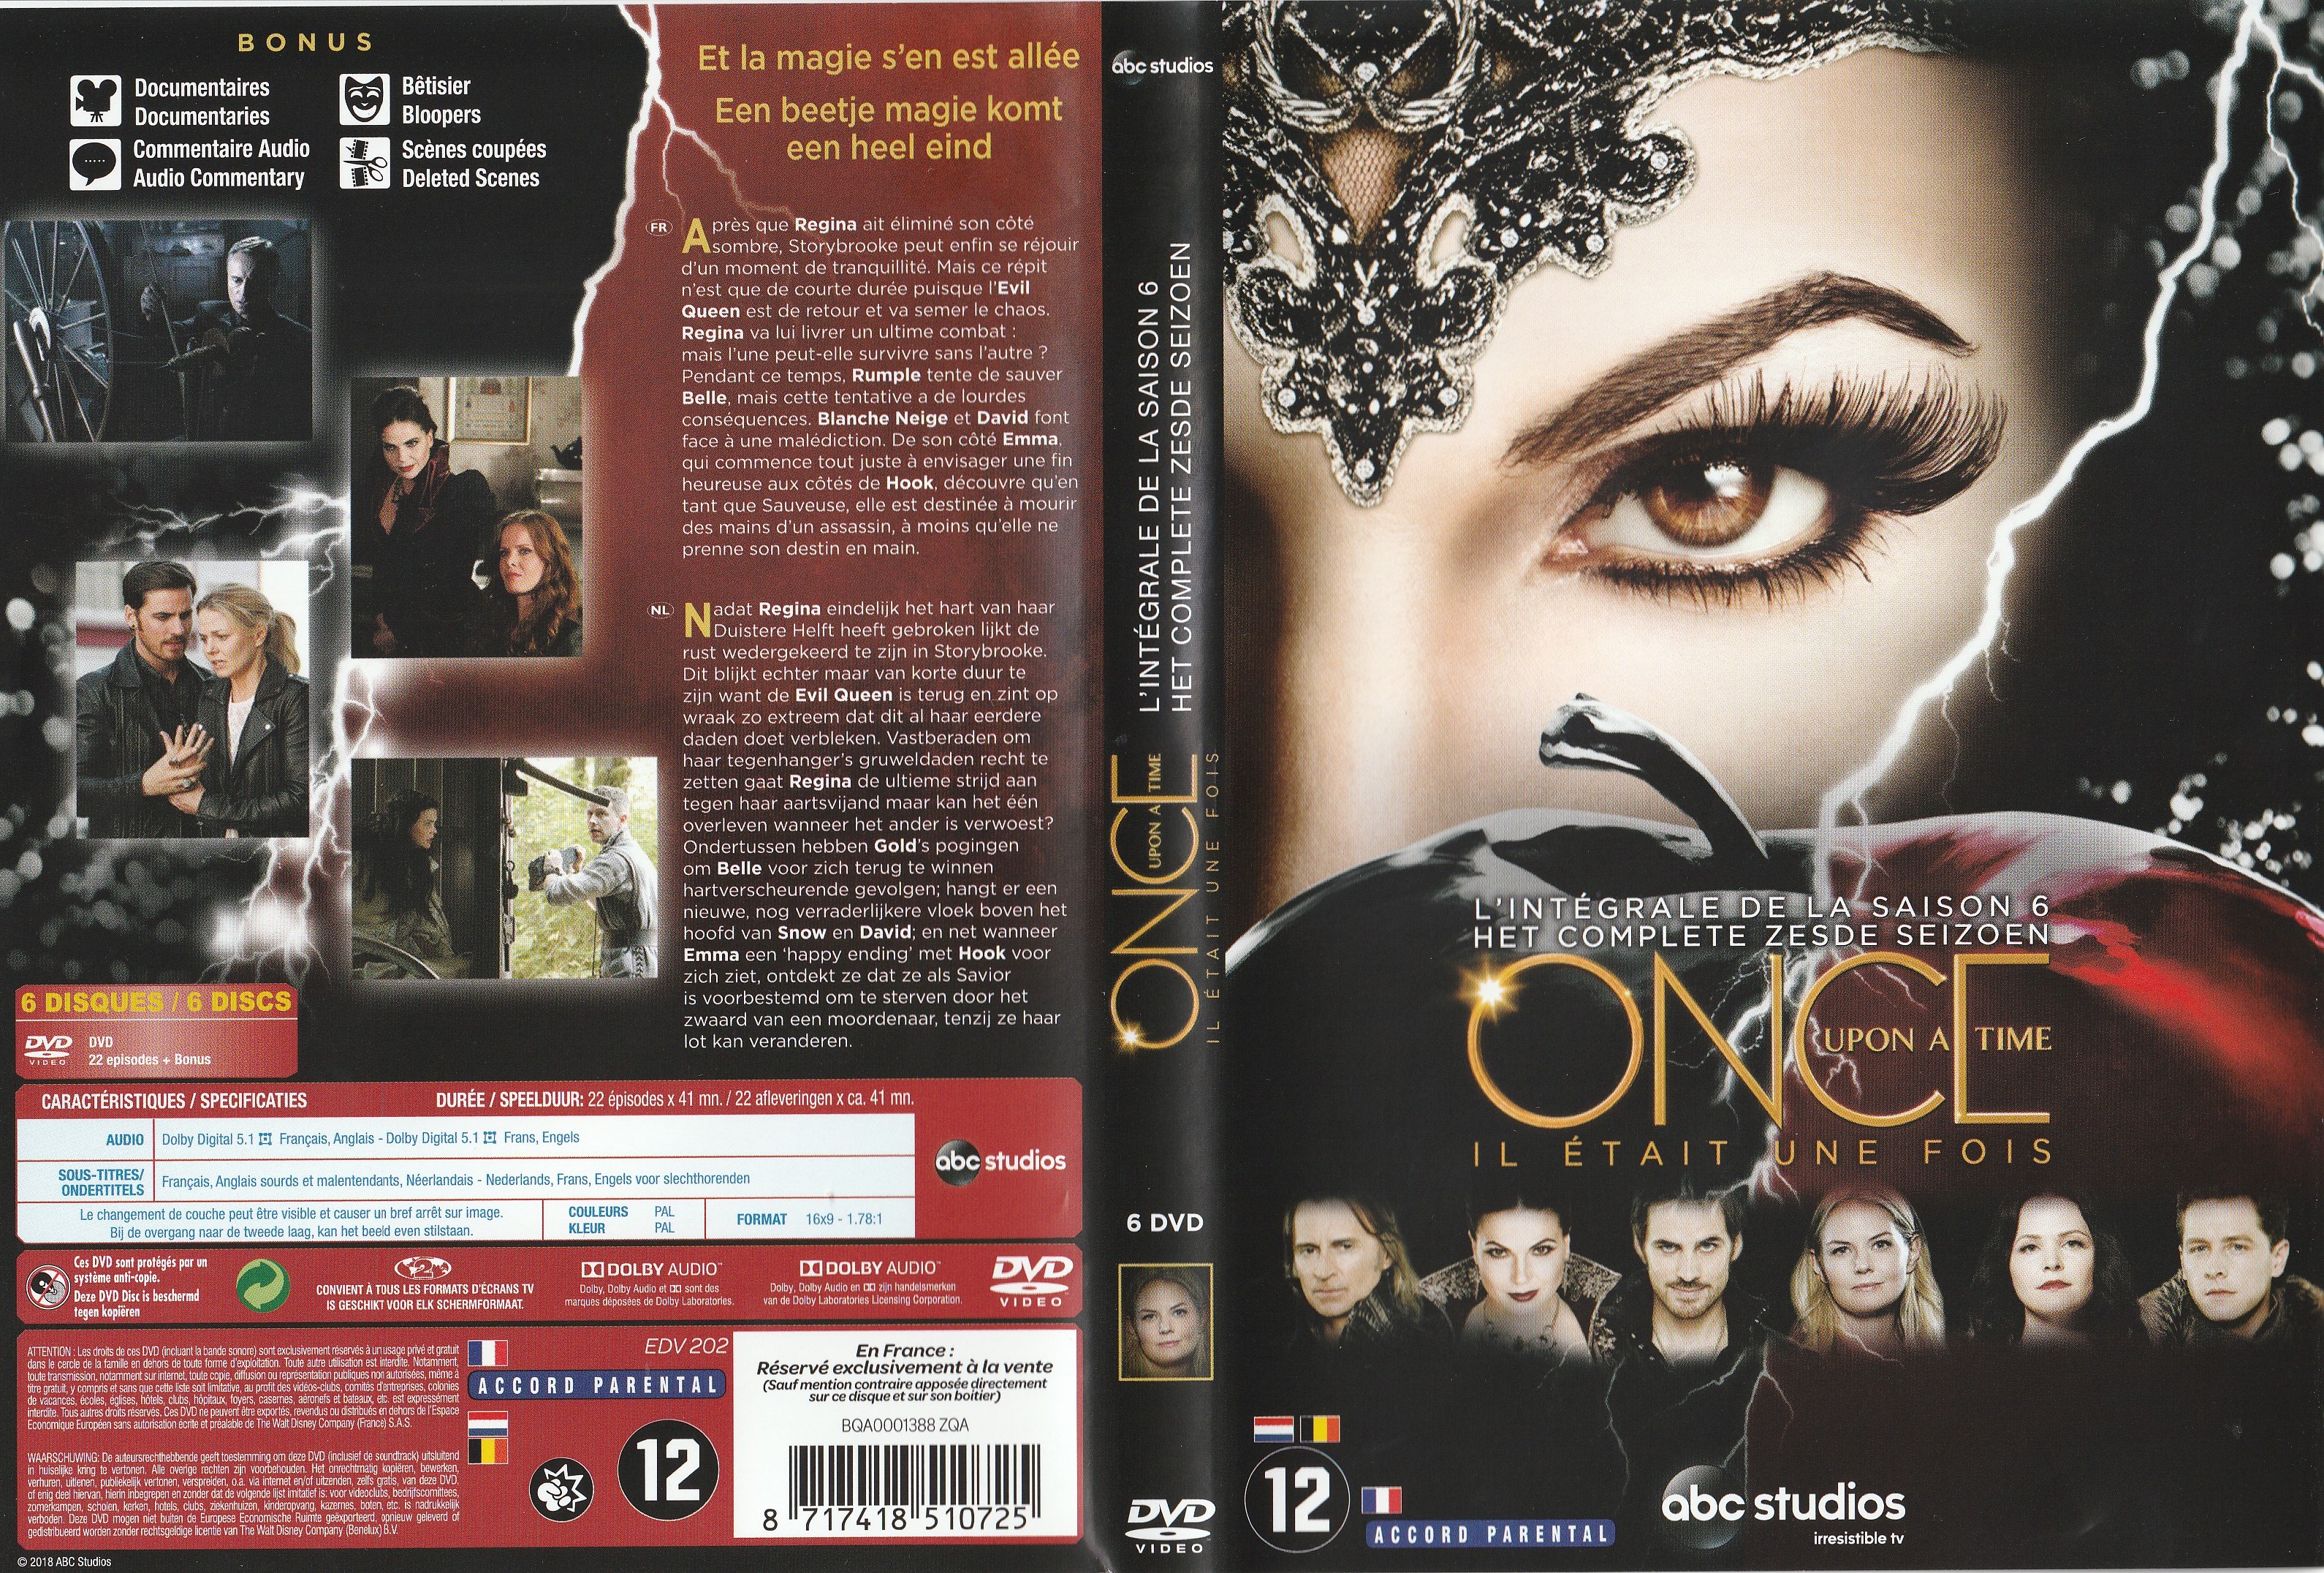 Jaquette DVD Once Upon a Time saison 6